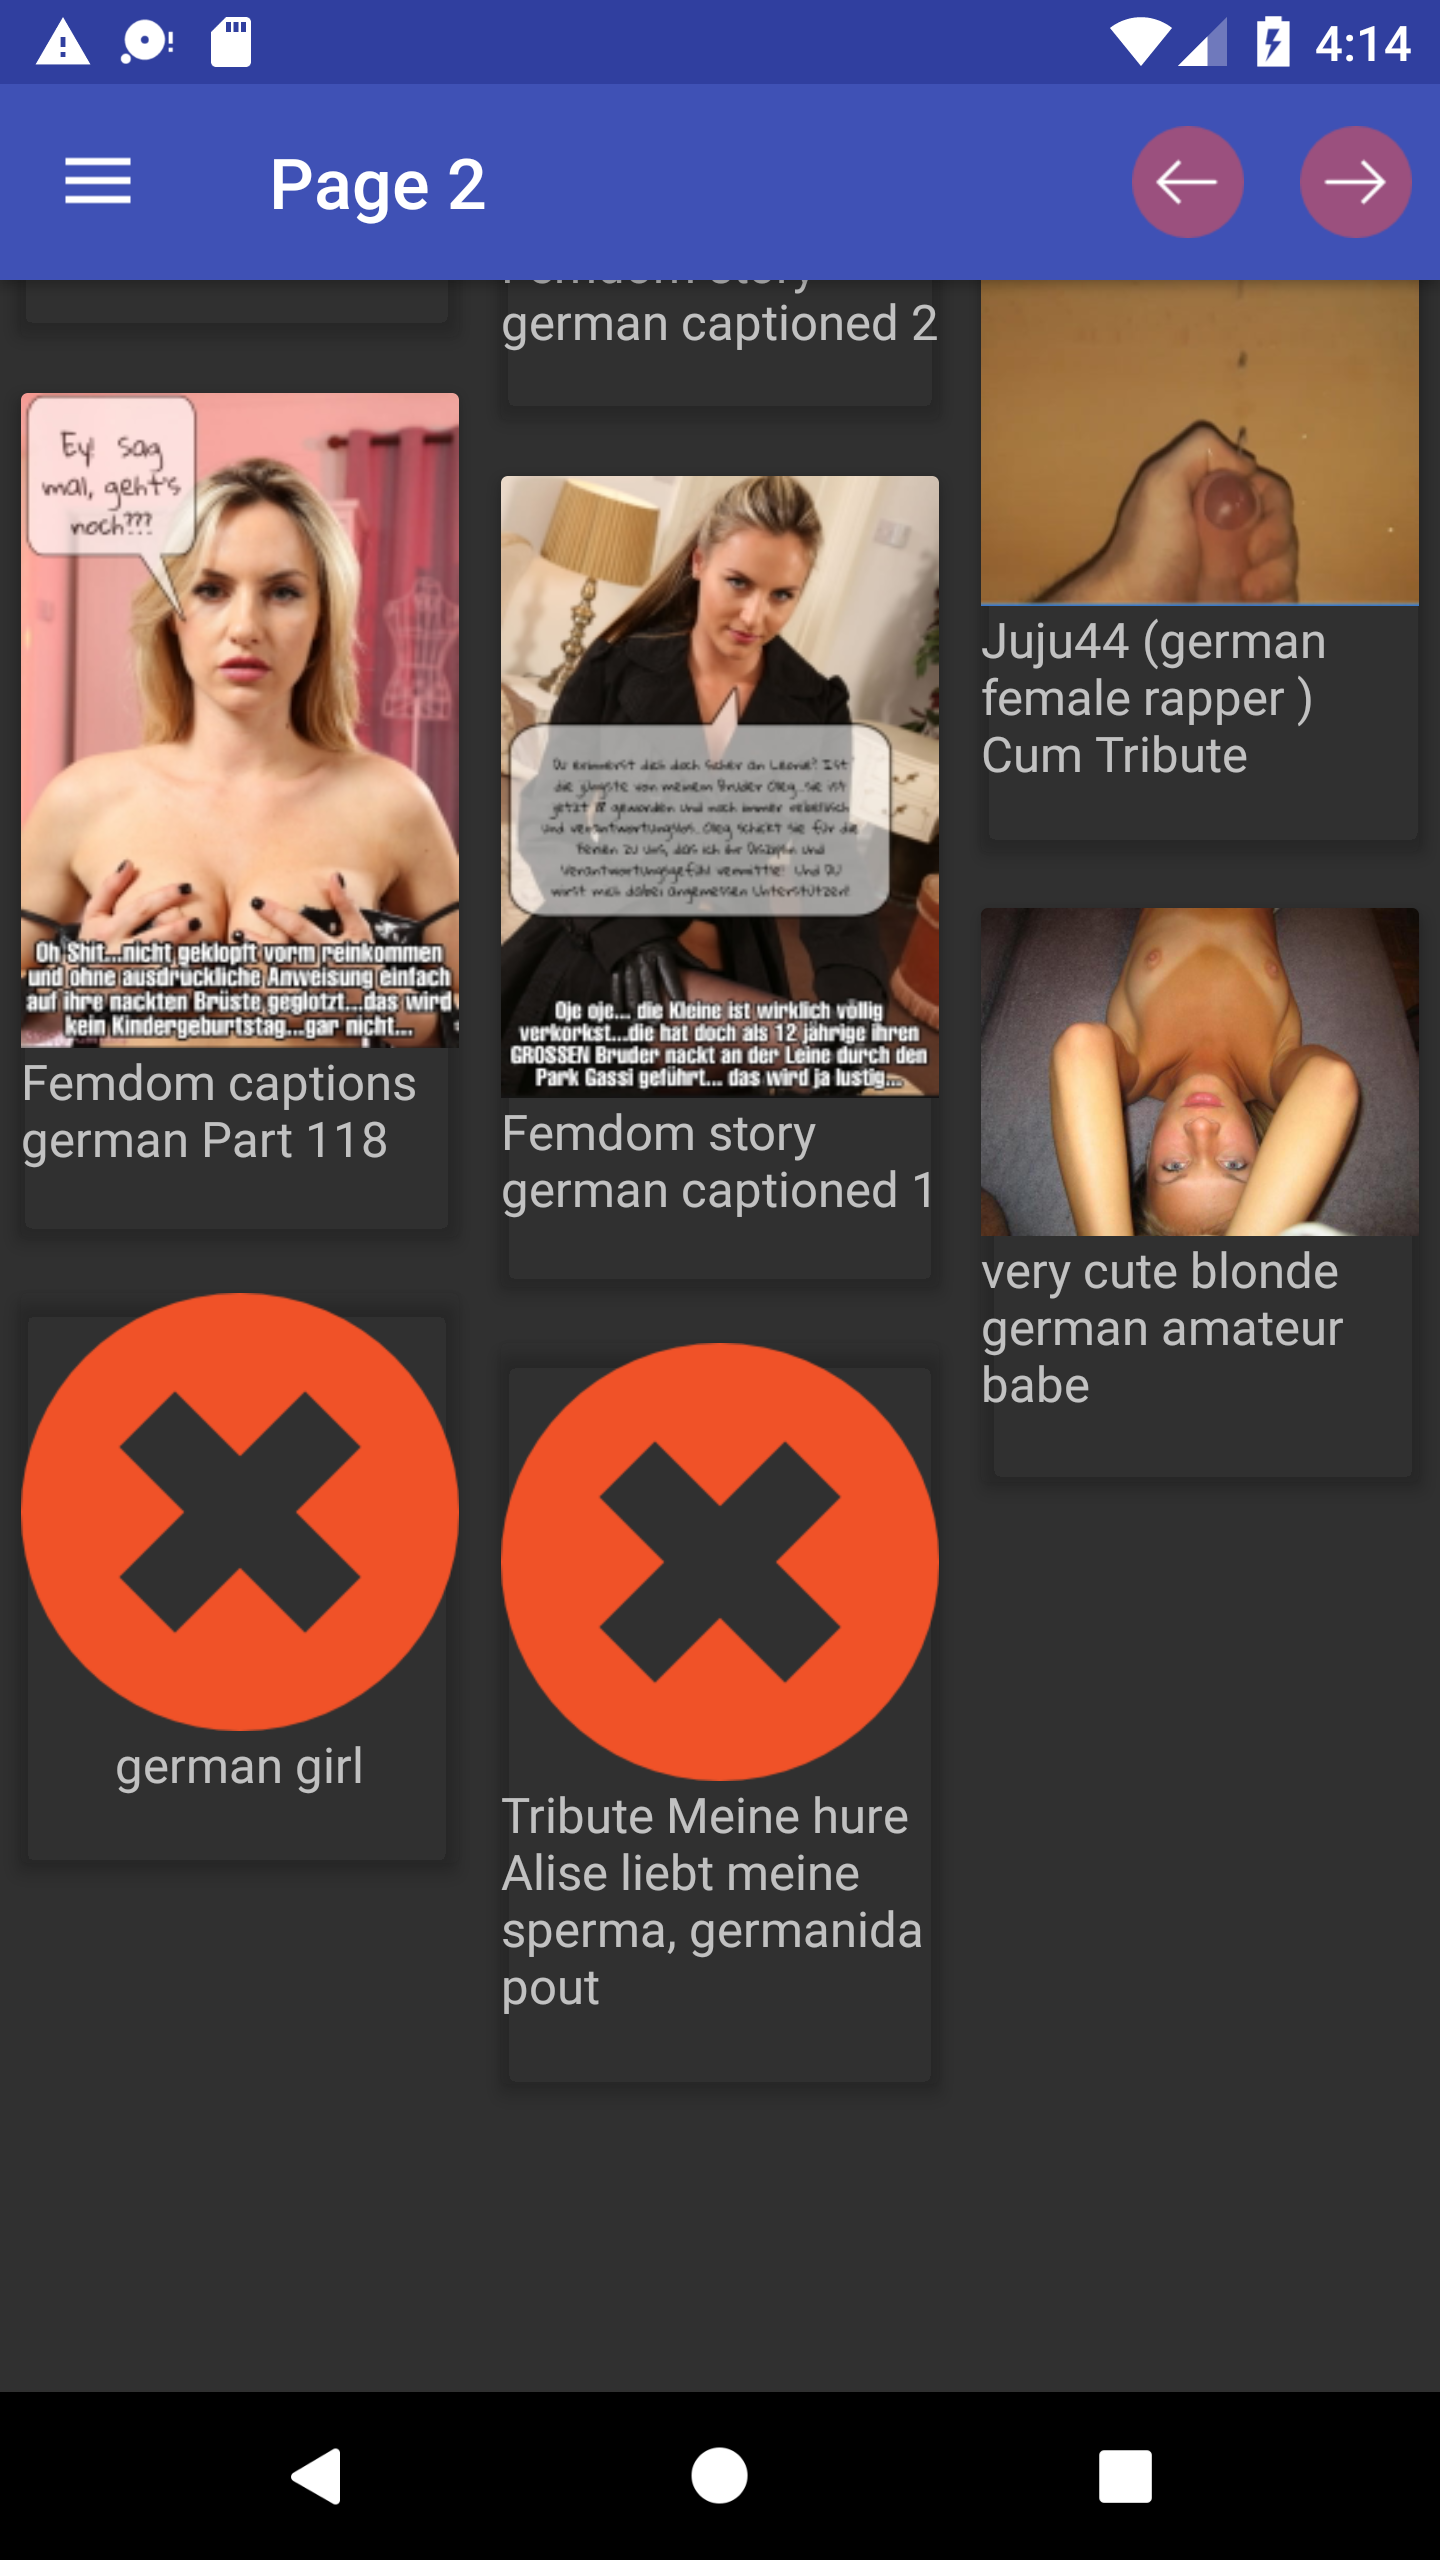 German Porn apk,best,adult,hentai,sexy,hentaimanga,galleries,app,porn,mobile,pics,anime,henti,hot,gallery,android,pic,mature,pornstars